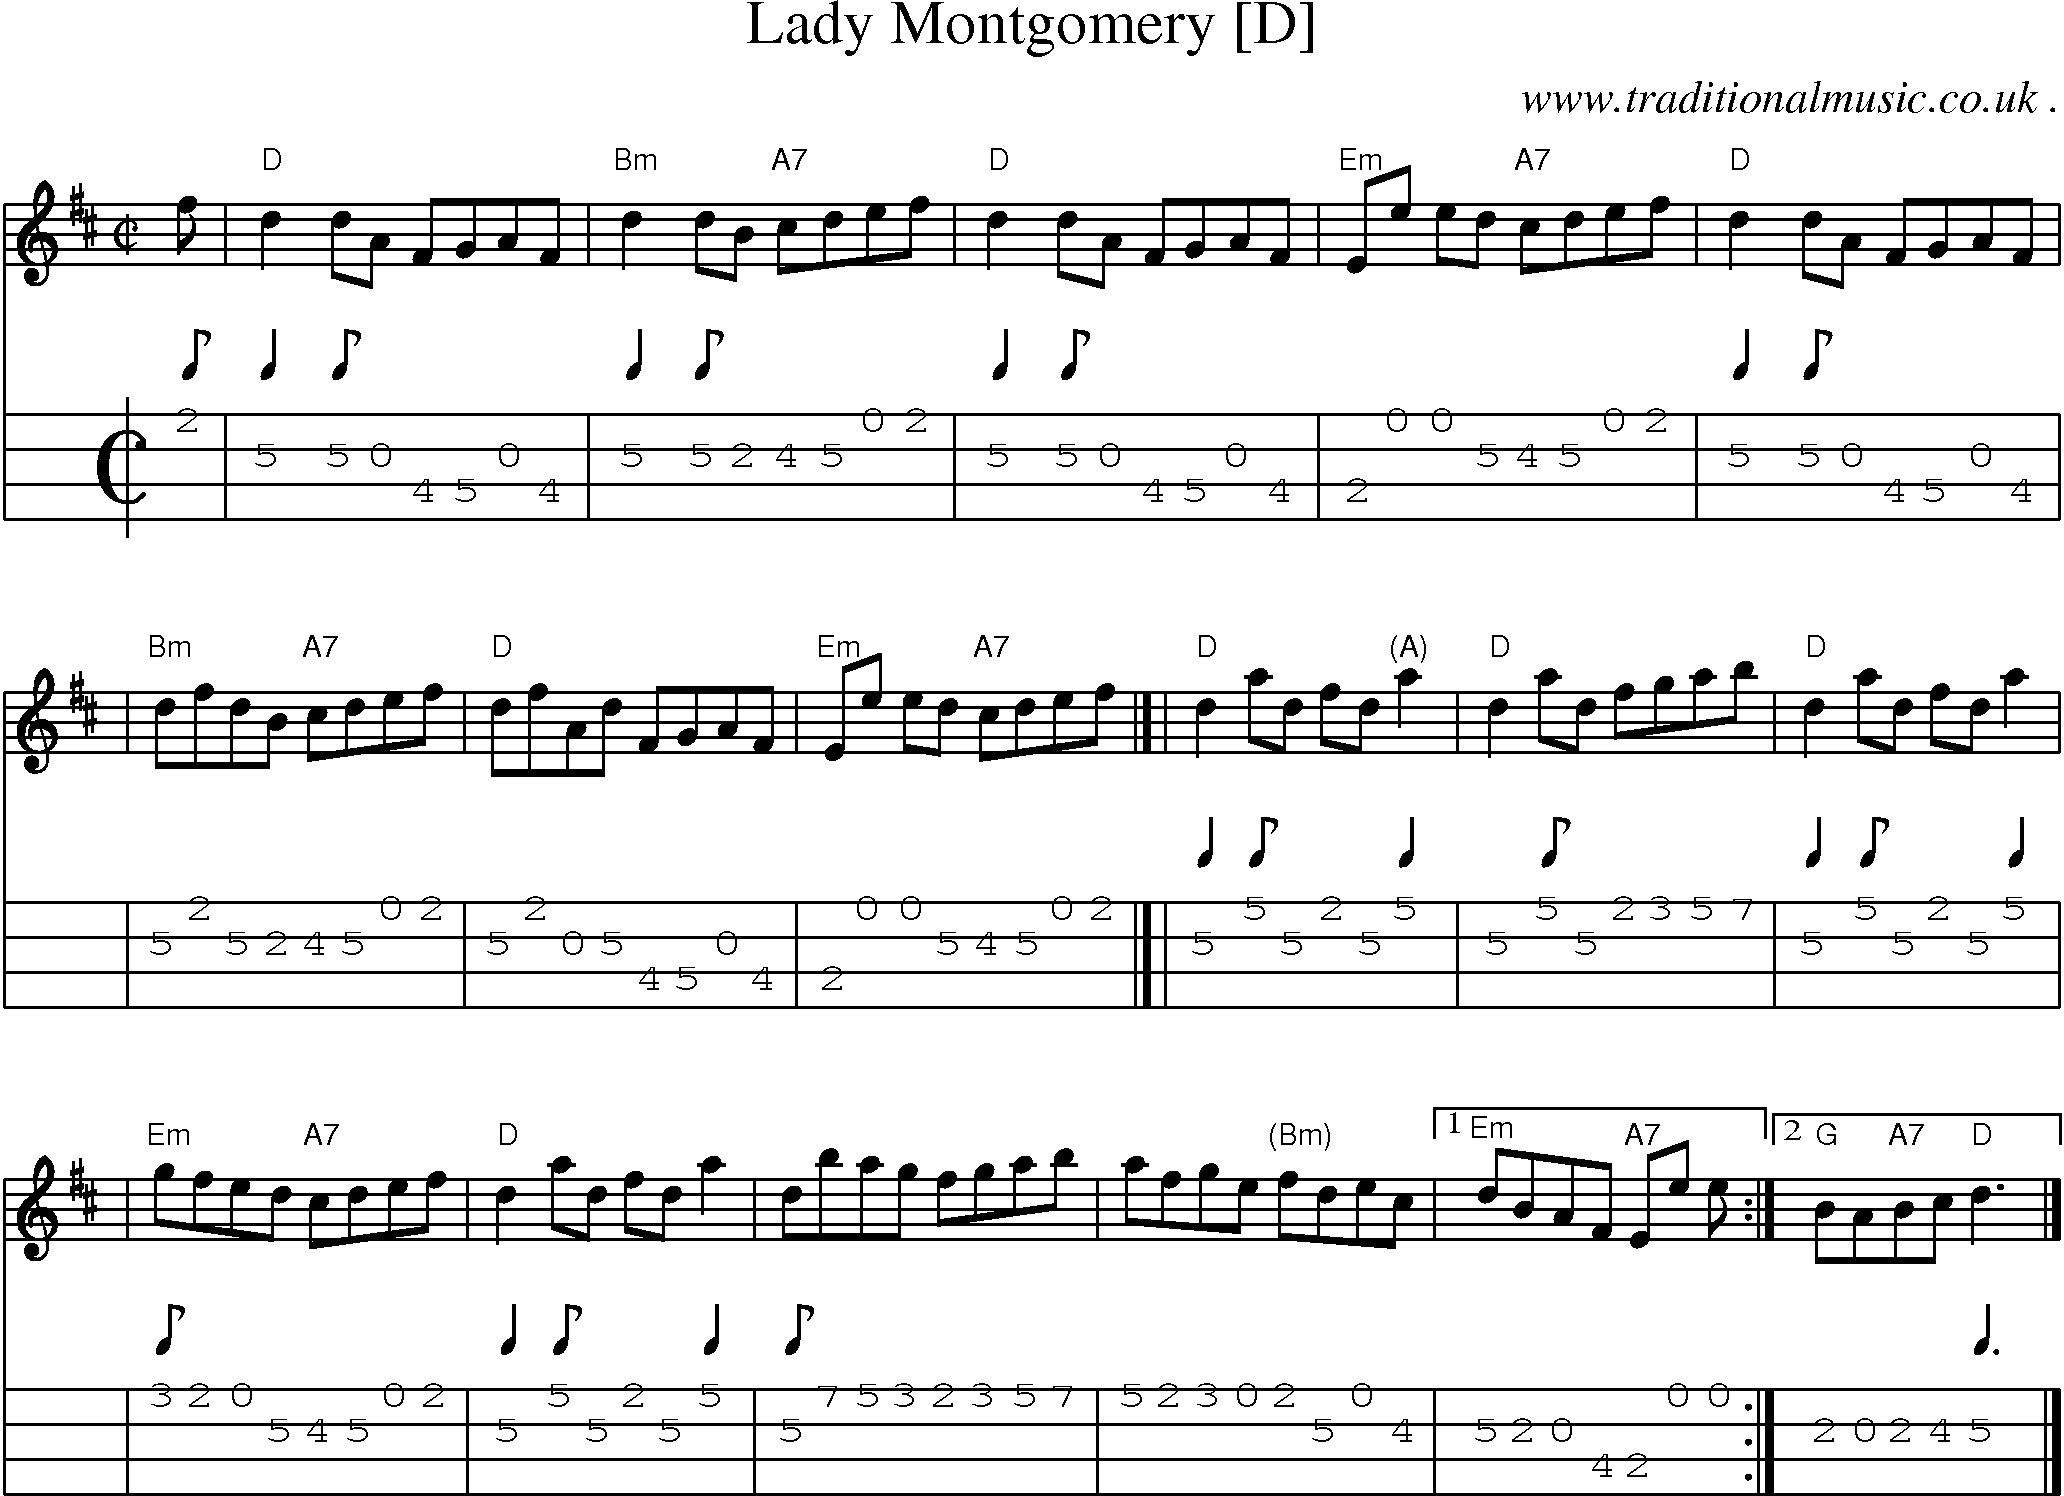 Sheet-music  score, Chords and Mandolin Tabs for Lady Montgomery [d]